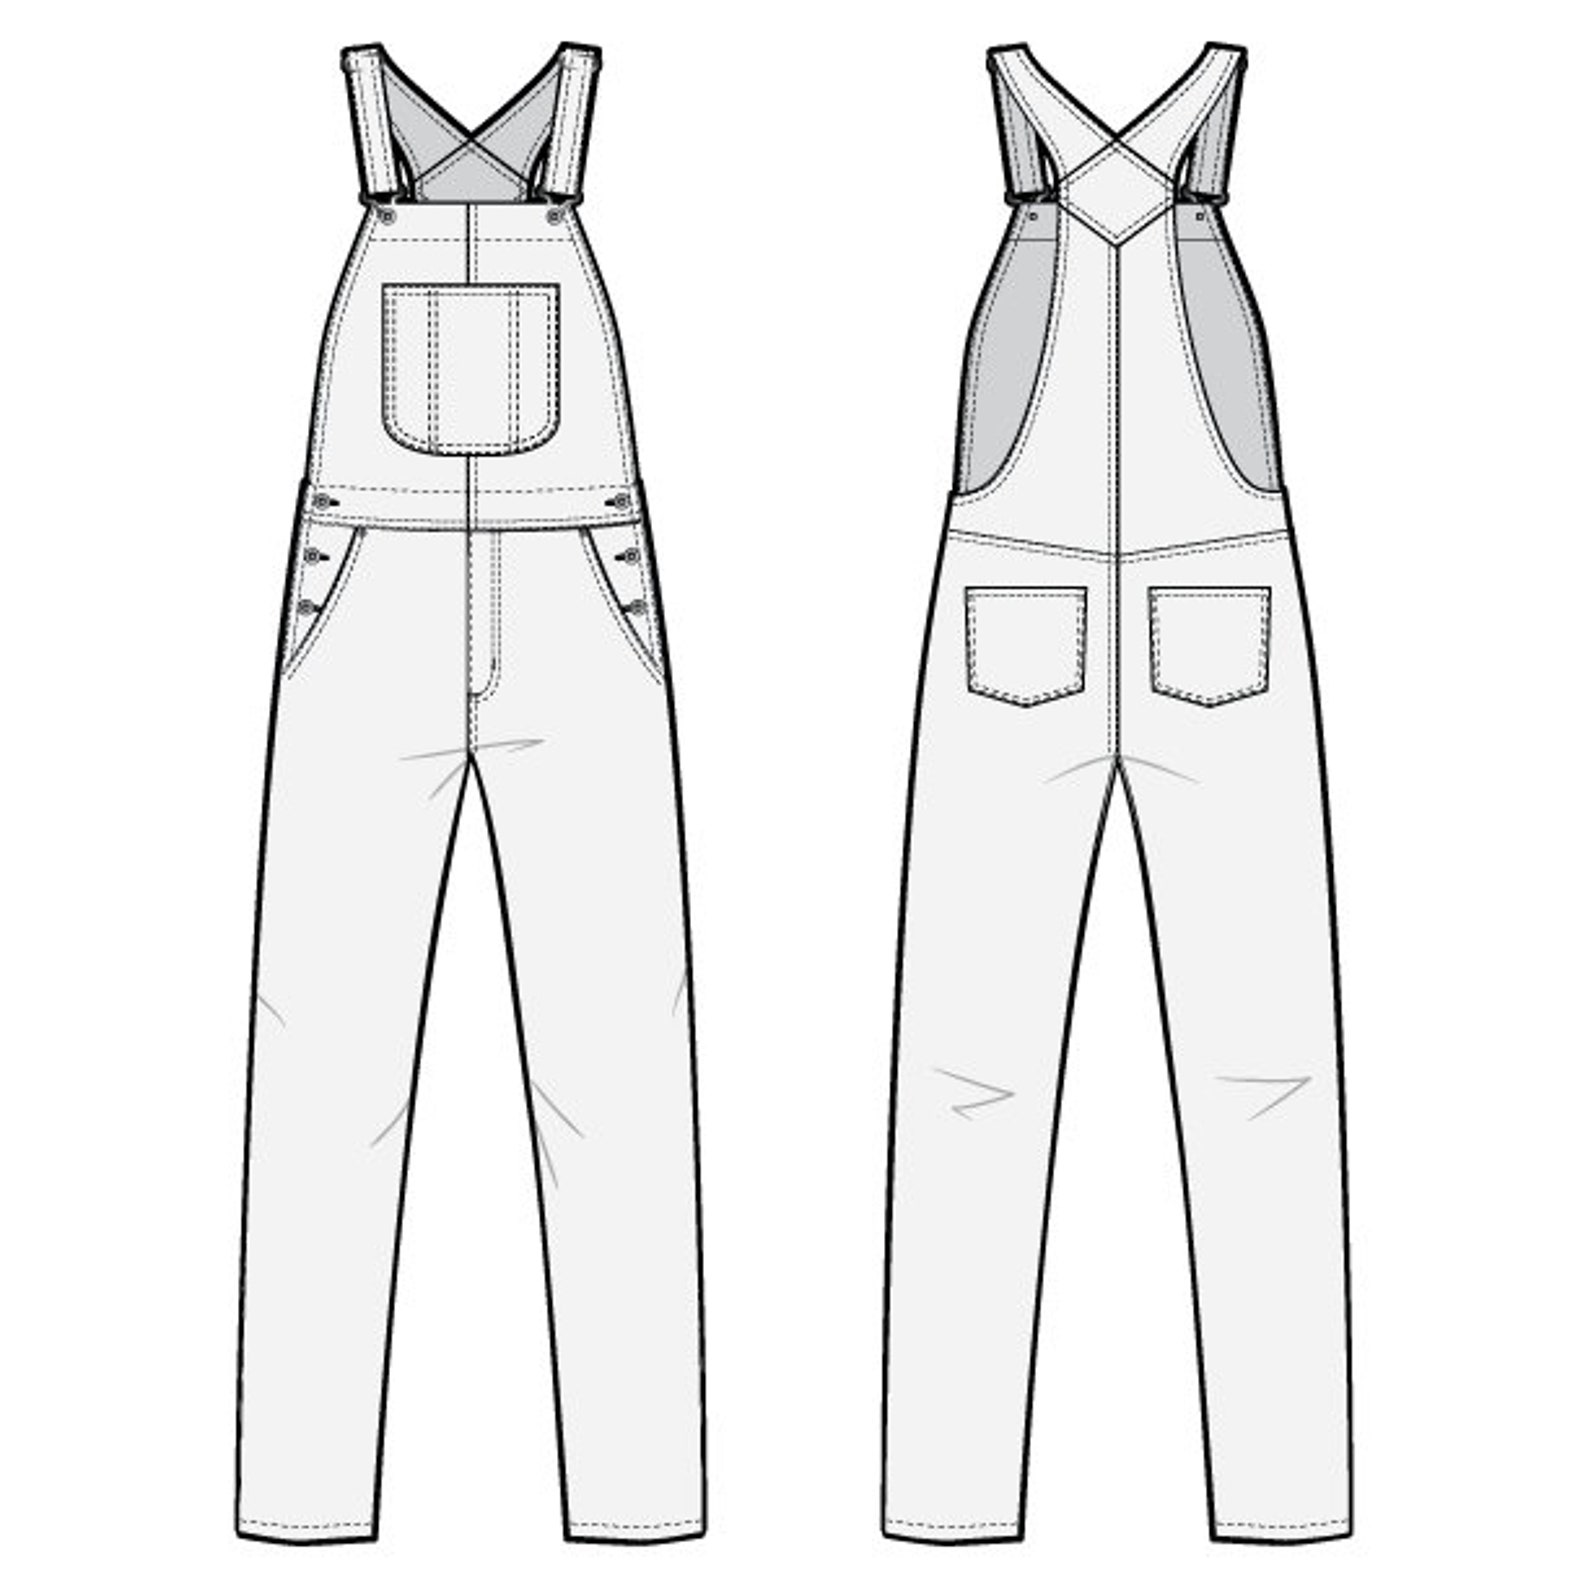 Slim Fit Overall Jeans PDF Sewing Pattern Sizes 28 / 29 / 30 / | Etsy